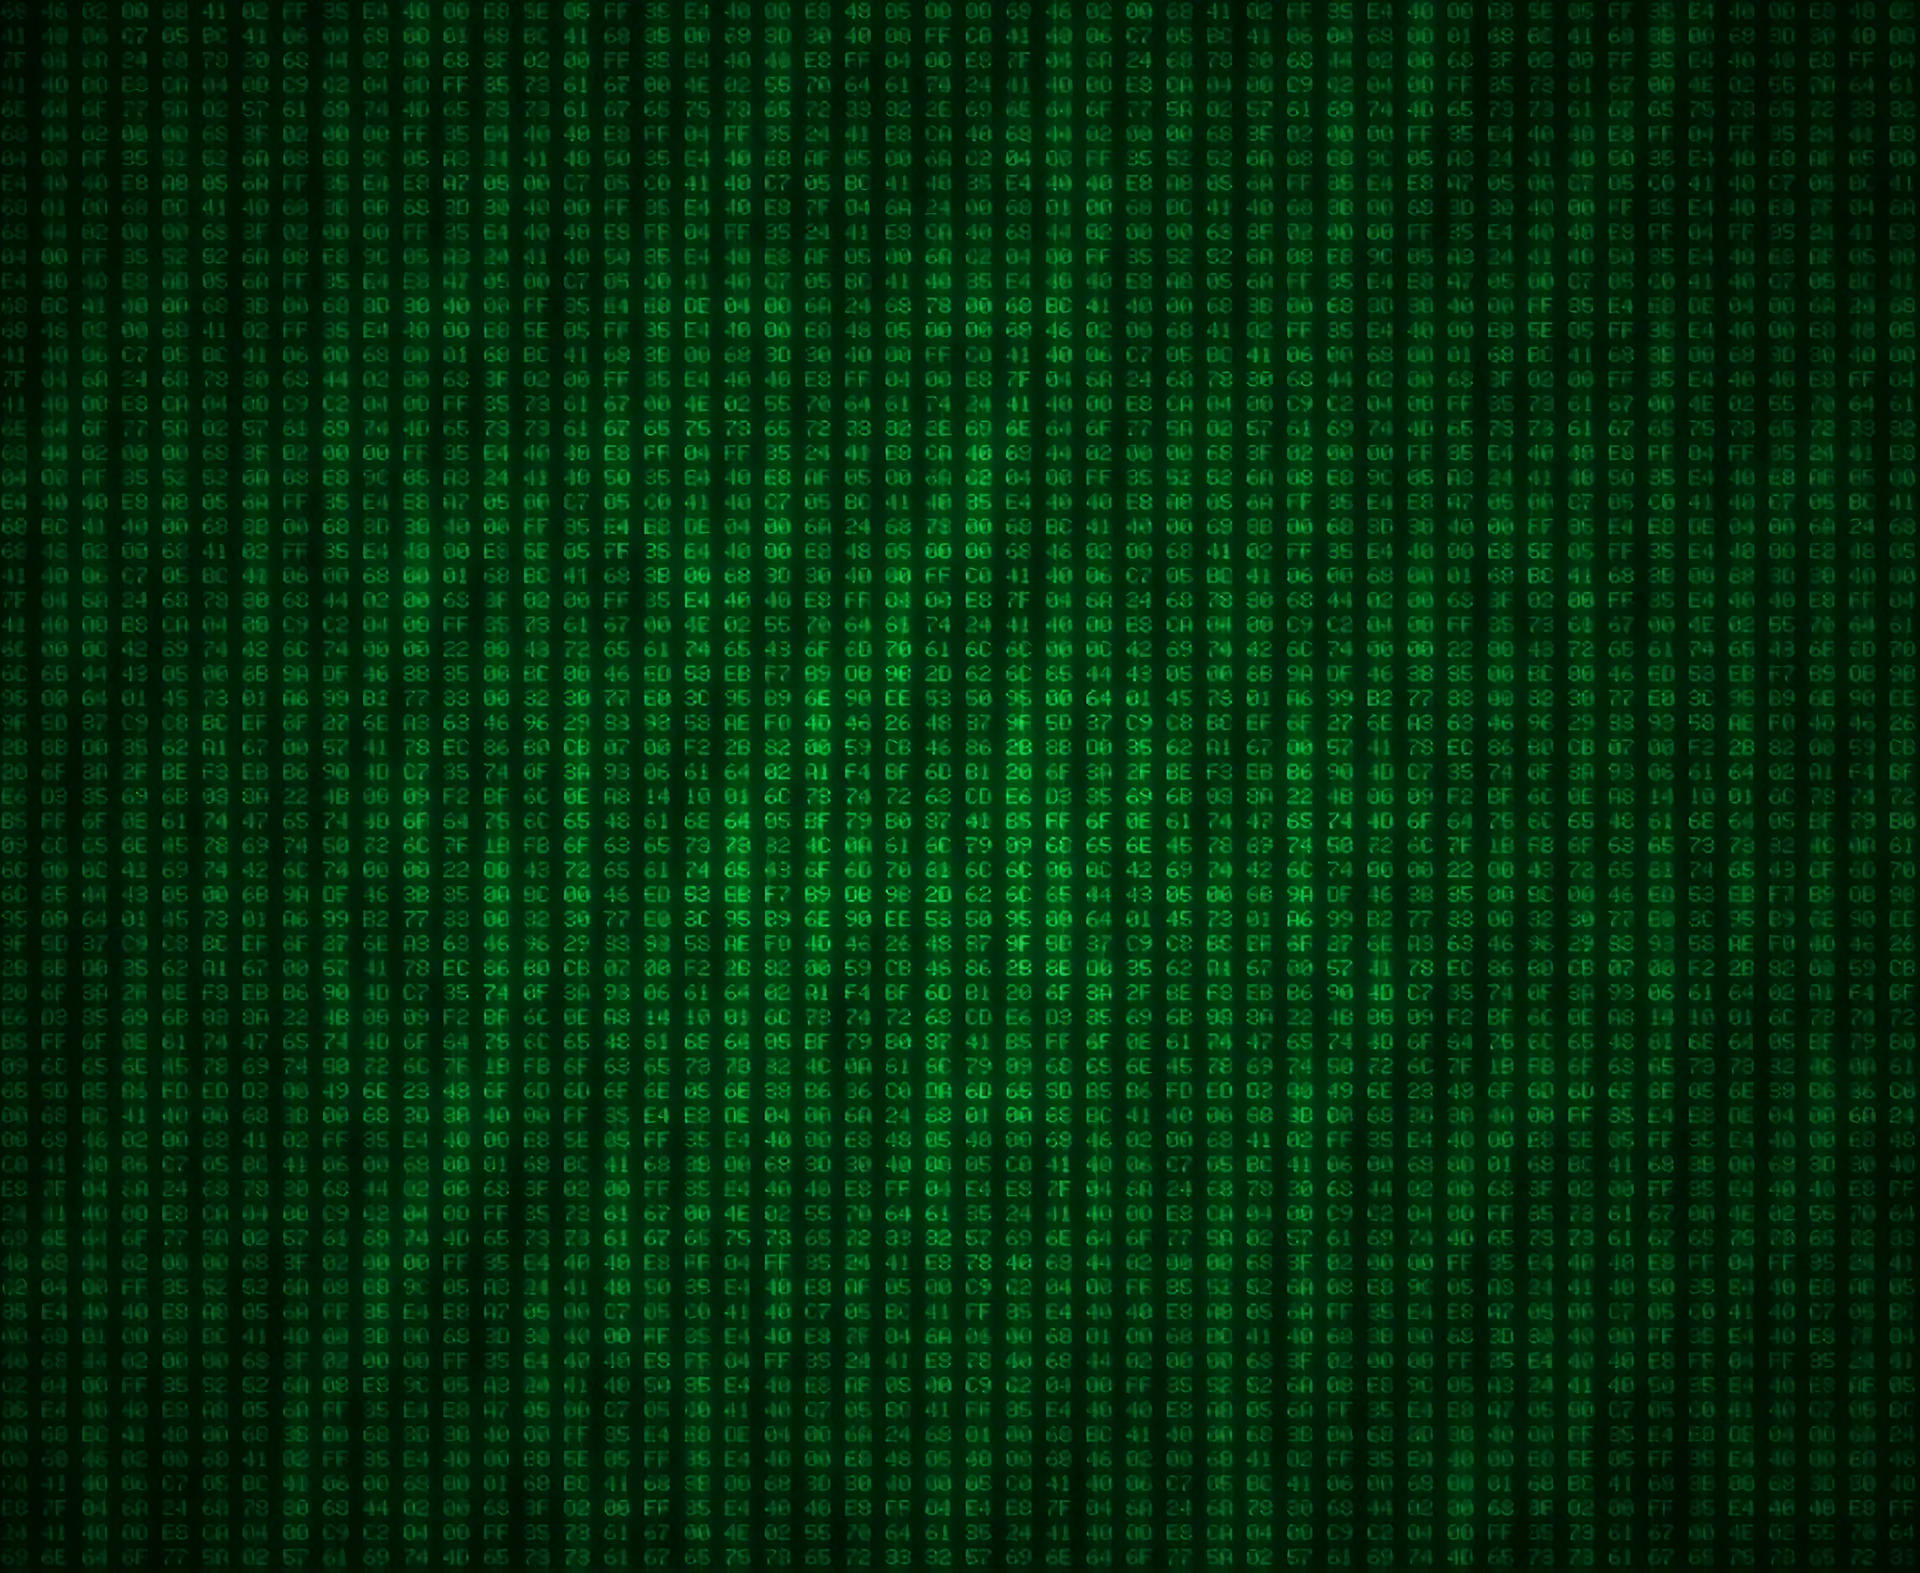 Hexadecimal Numeral System Of Coding In Green Background